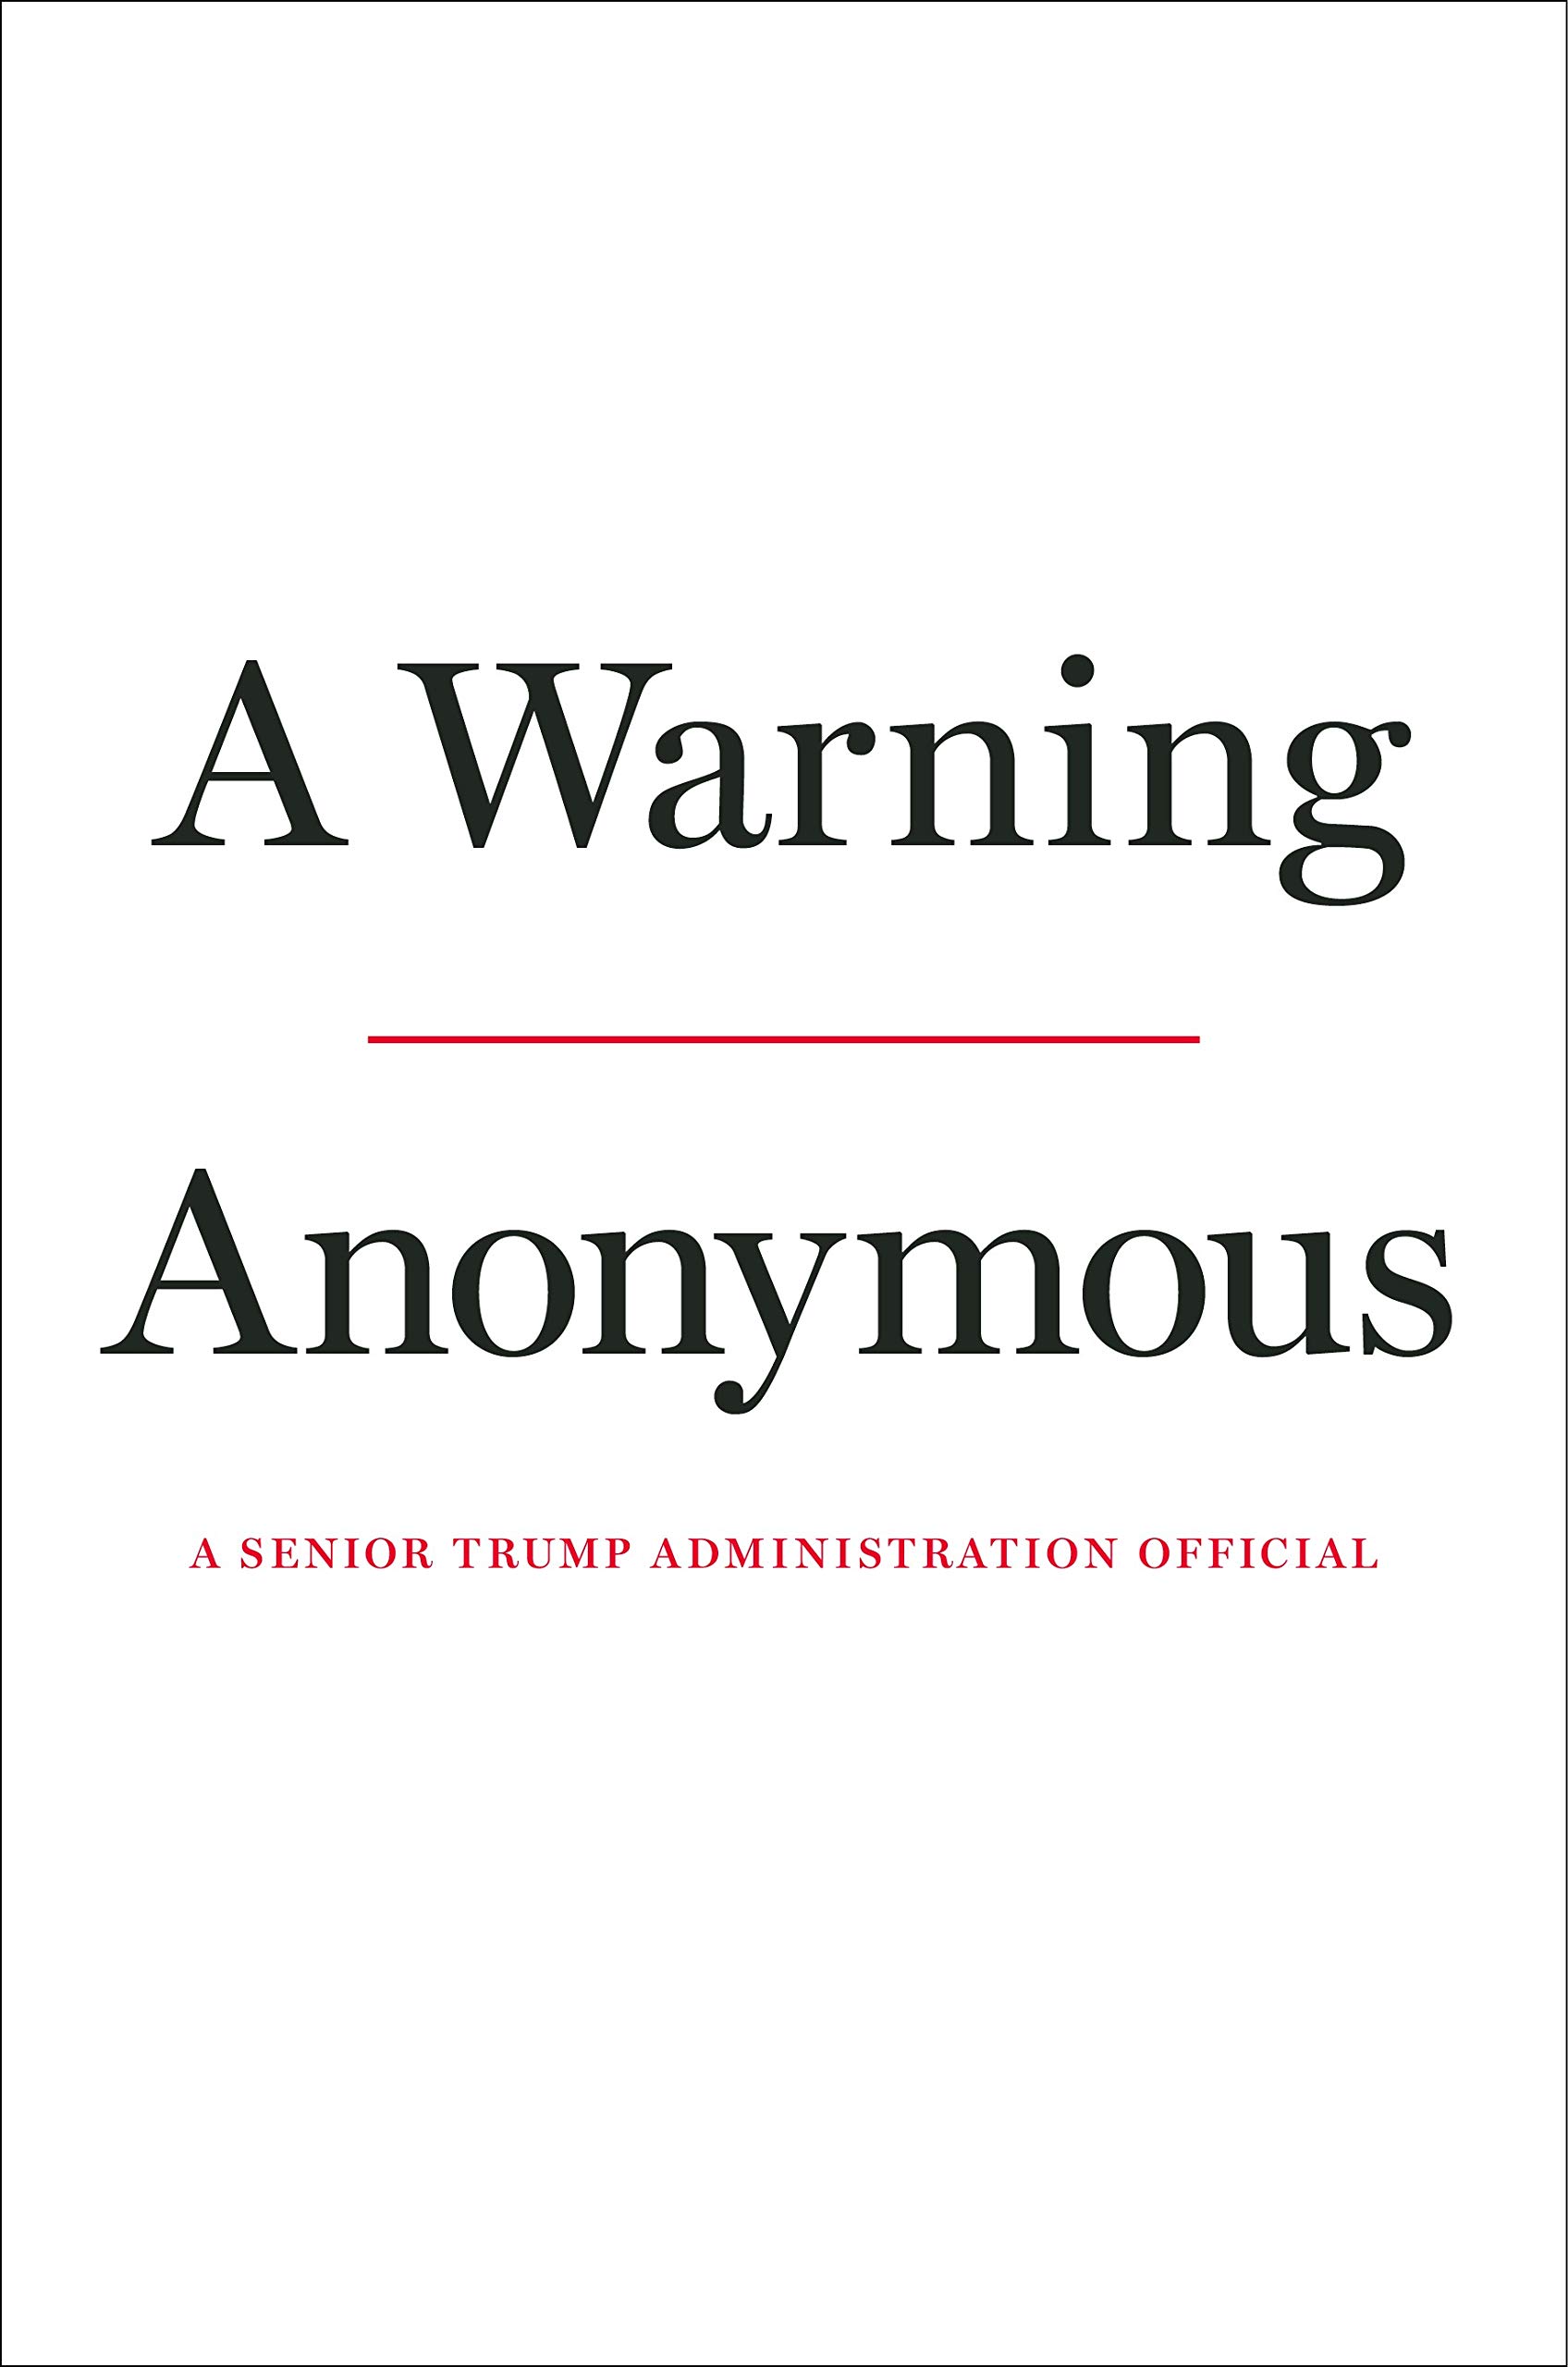 A WARNING – ANONYMOUS